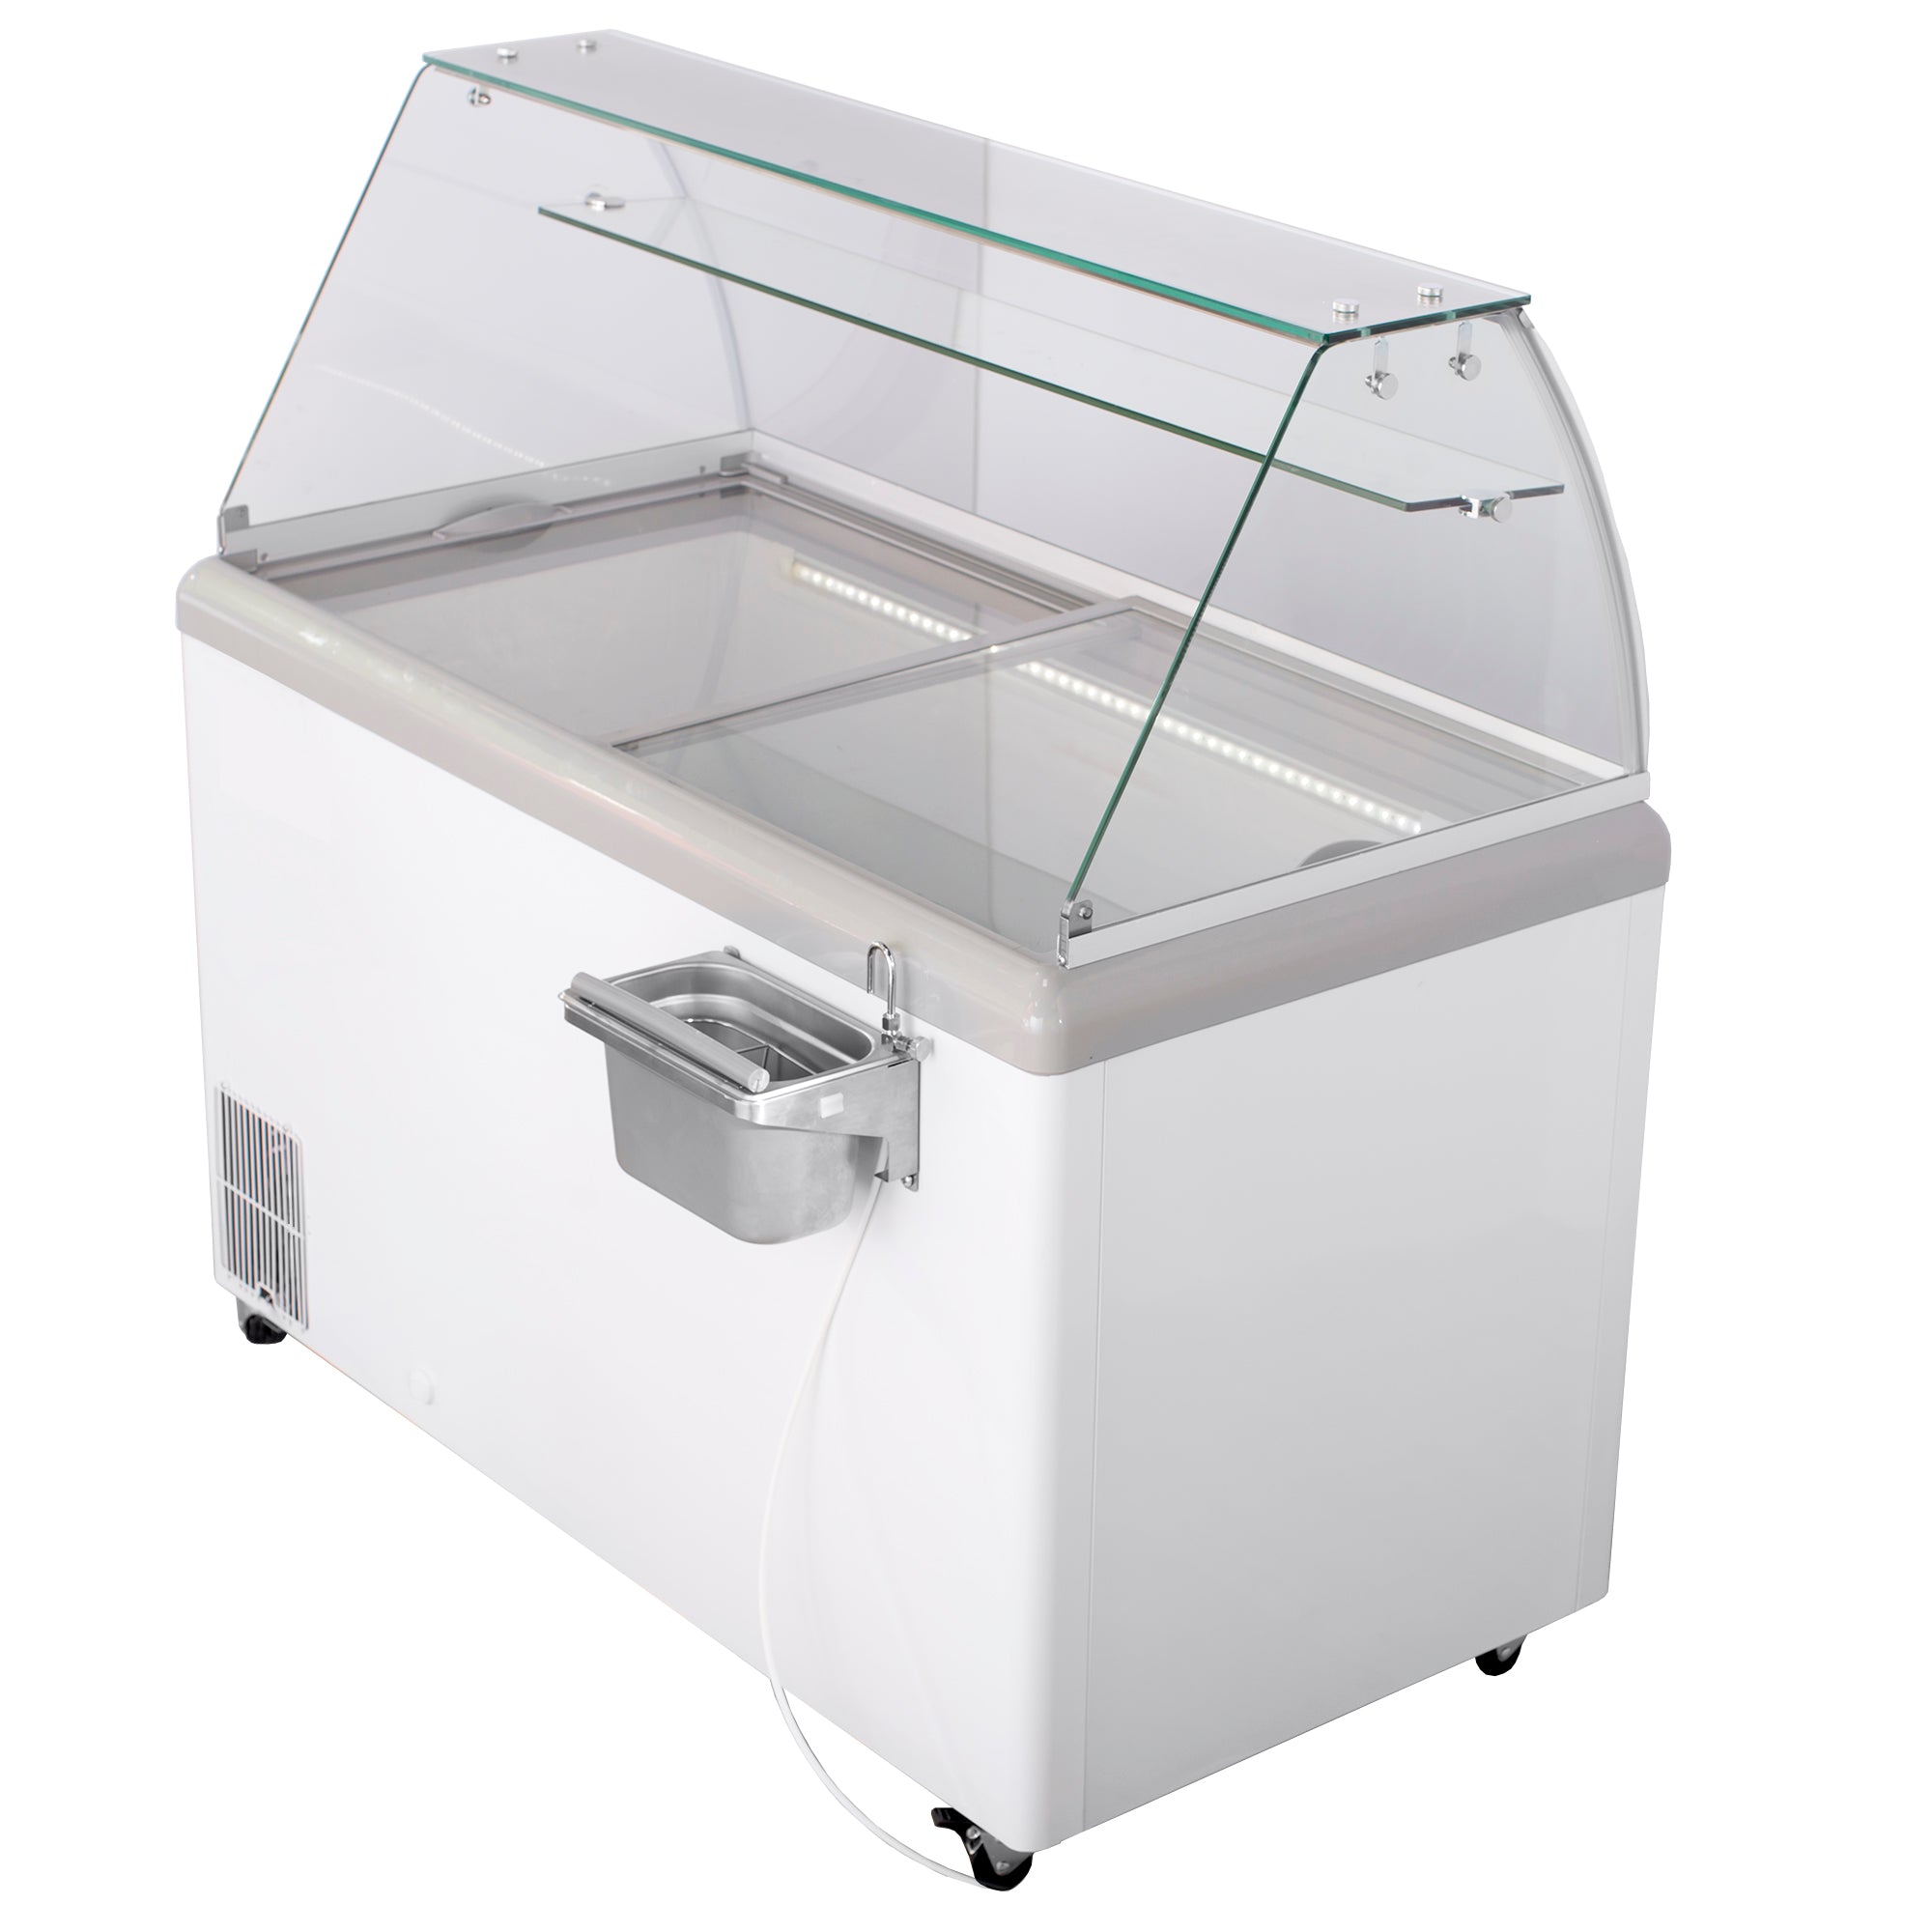 Maxx Cold - MXDC-8, Maxx Cold Curved Glass Ice Cream Dipping Cabinet Freezer, 52"W, 13.8 cu. ft. Storage Capacity, Holds up to (14) Flavor Tubs, in White